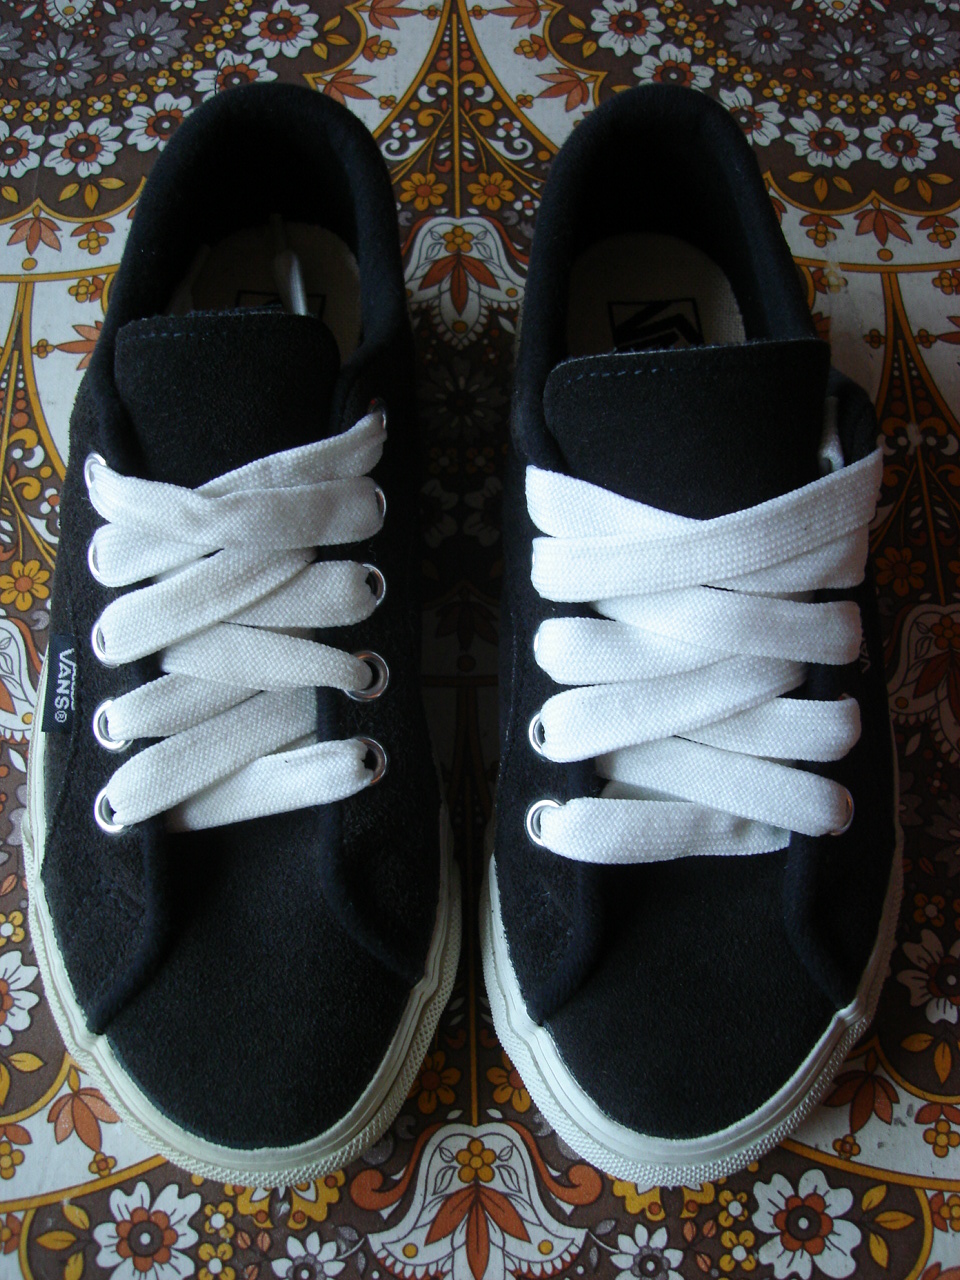 theothersideofthepillow: vintage VANS solid charcoal suede LAMPIN ...